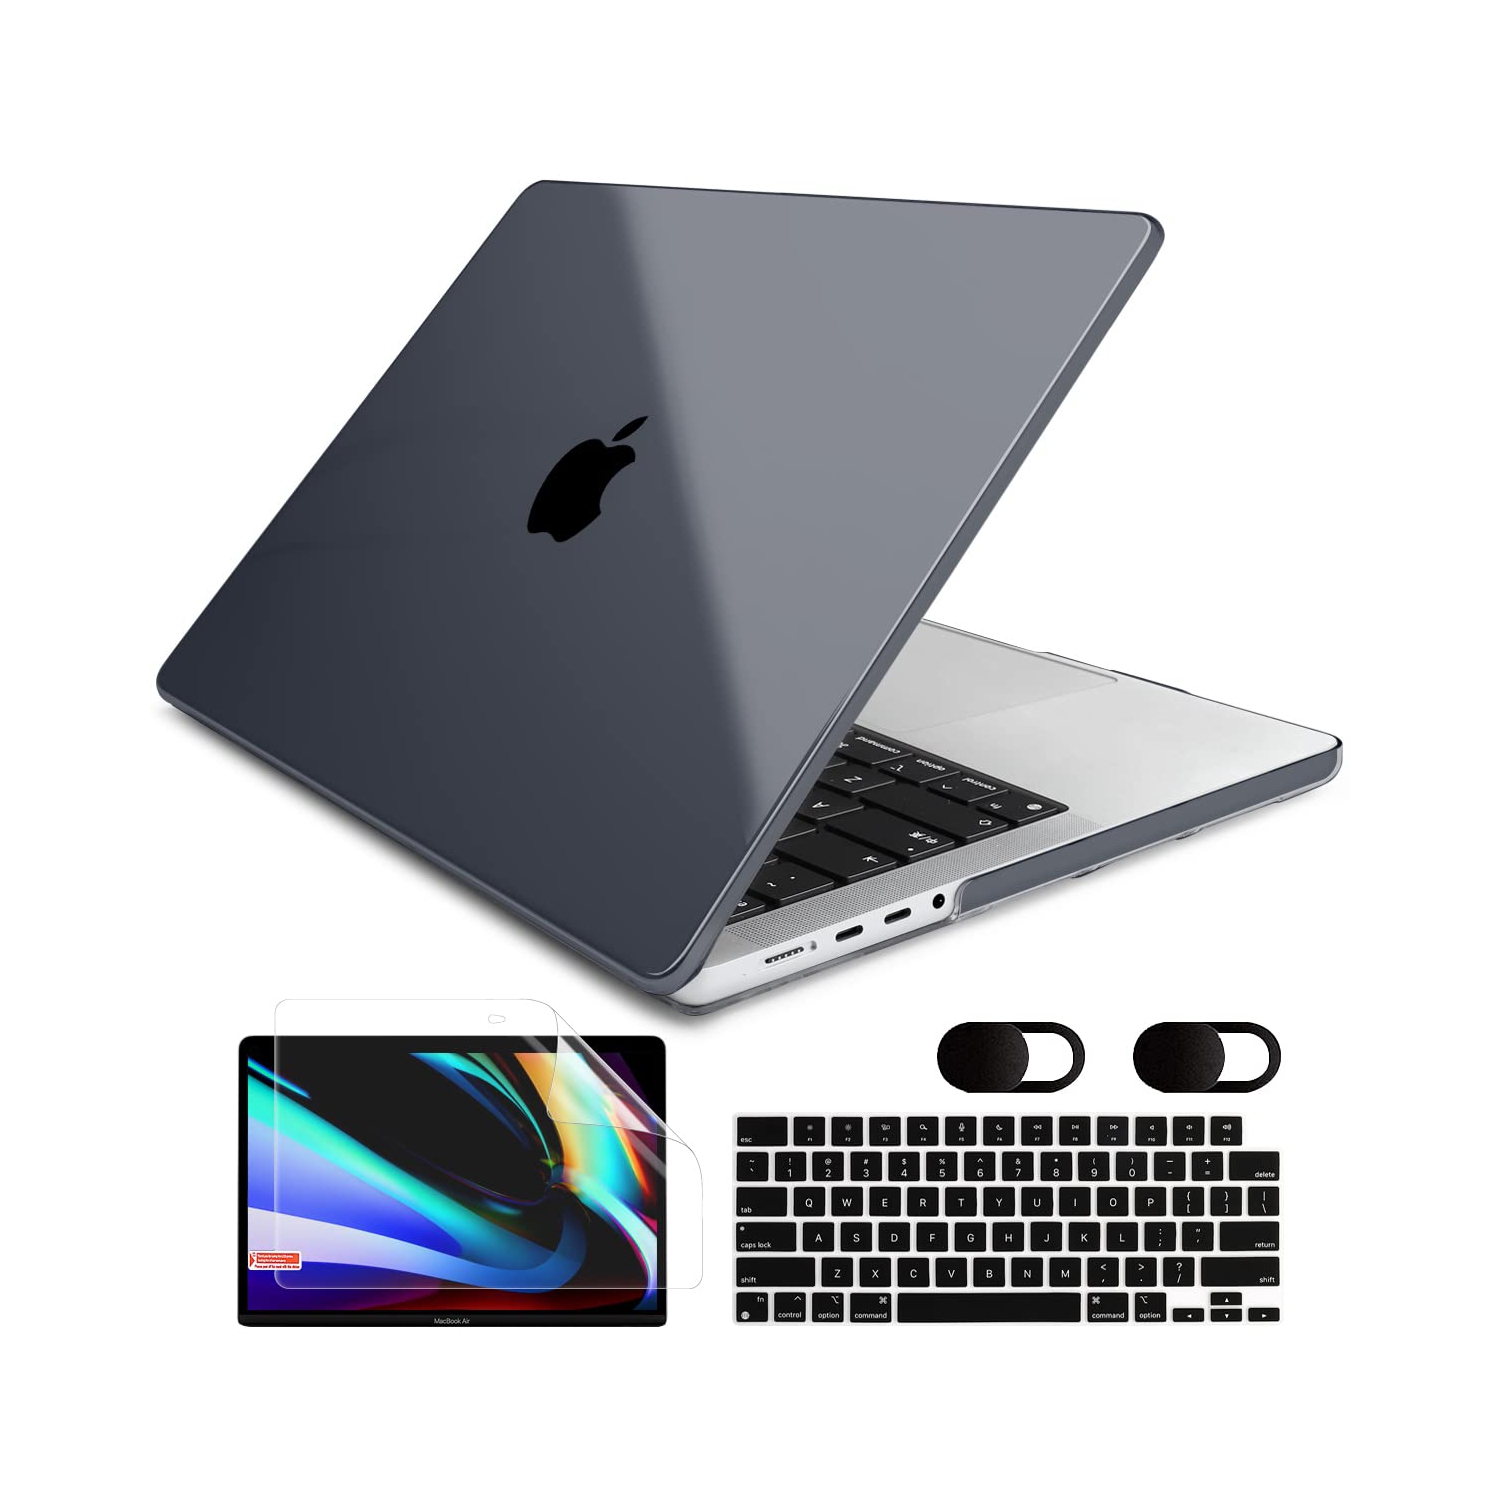 DONGKE MacBook Pro 16 inch Case 2022 2021 Release Model: A2485 M1 Pro/Max, Plastic Hard Shell Case with Keyboard Cover & Scr